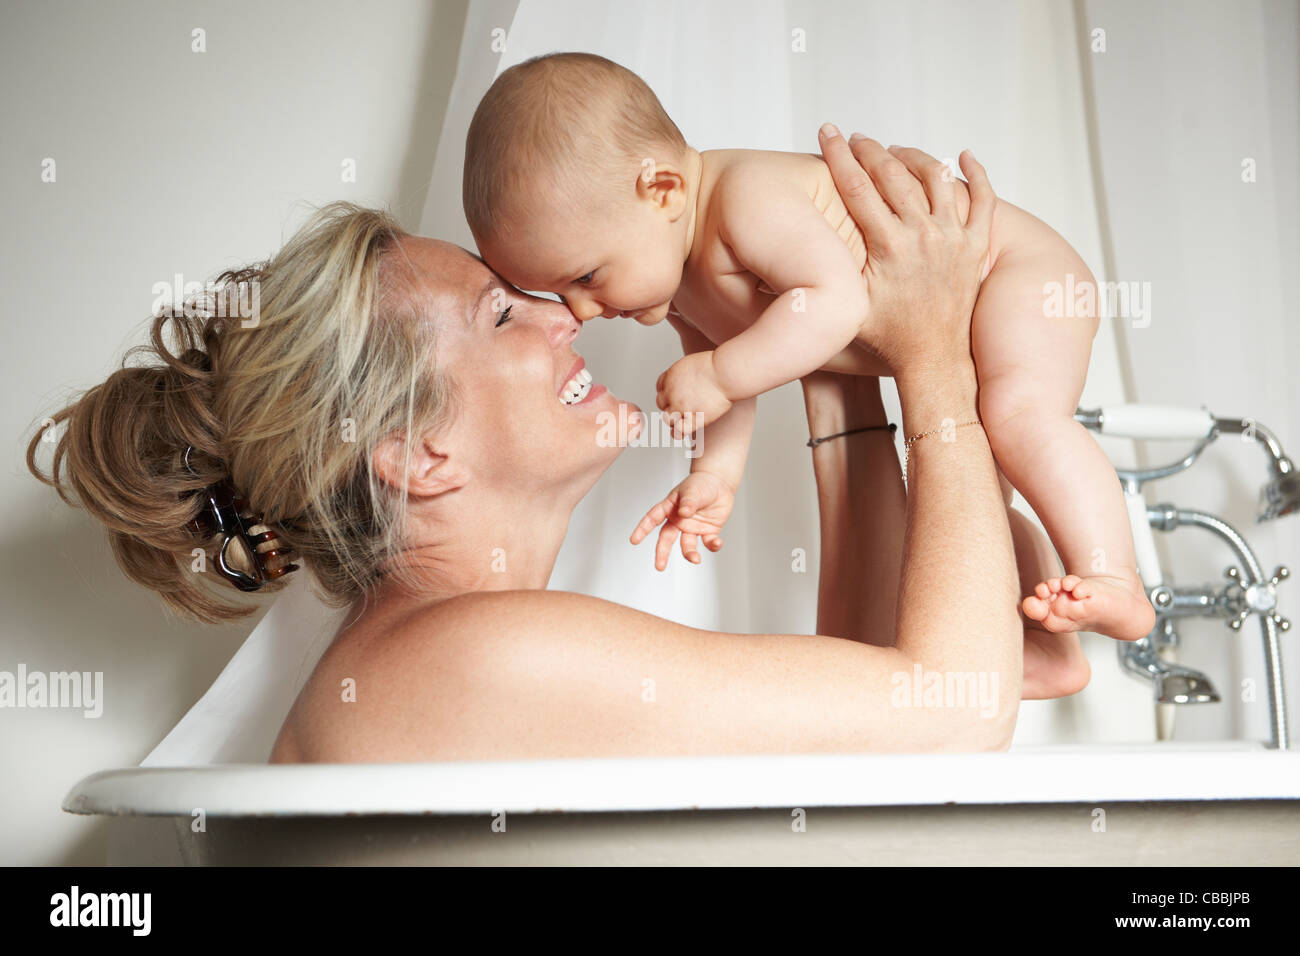 Smiling mother bathing with baby Stock Photo